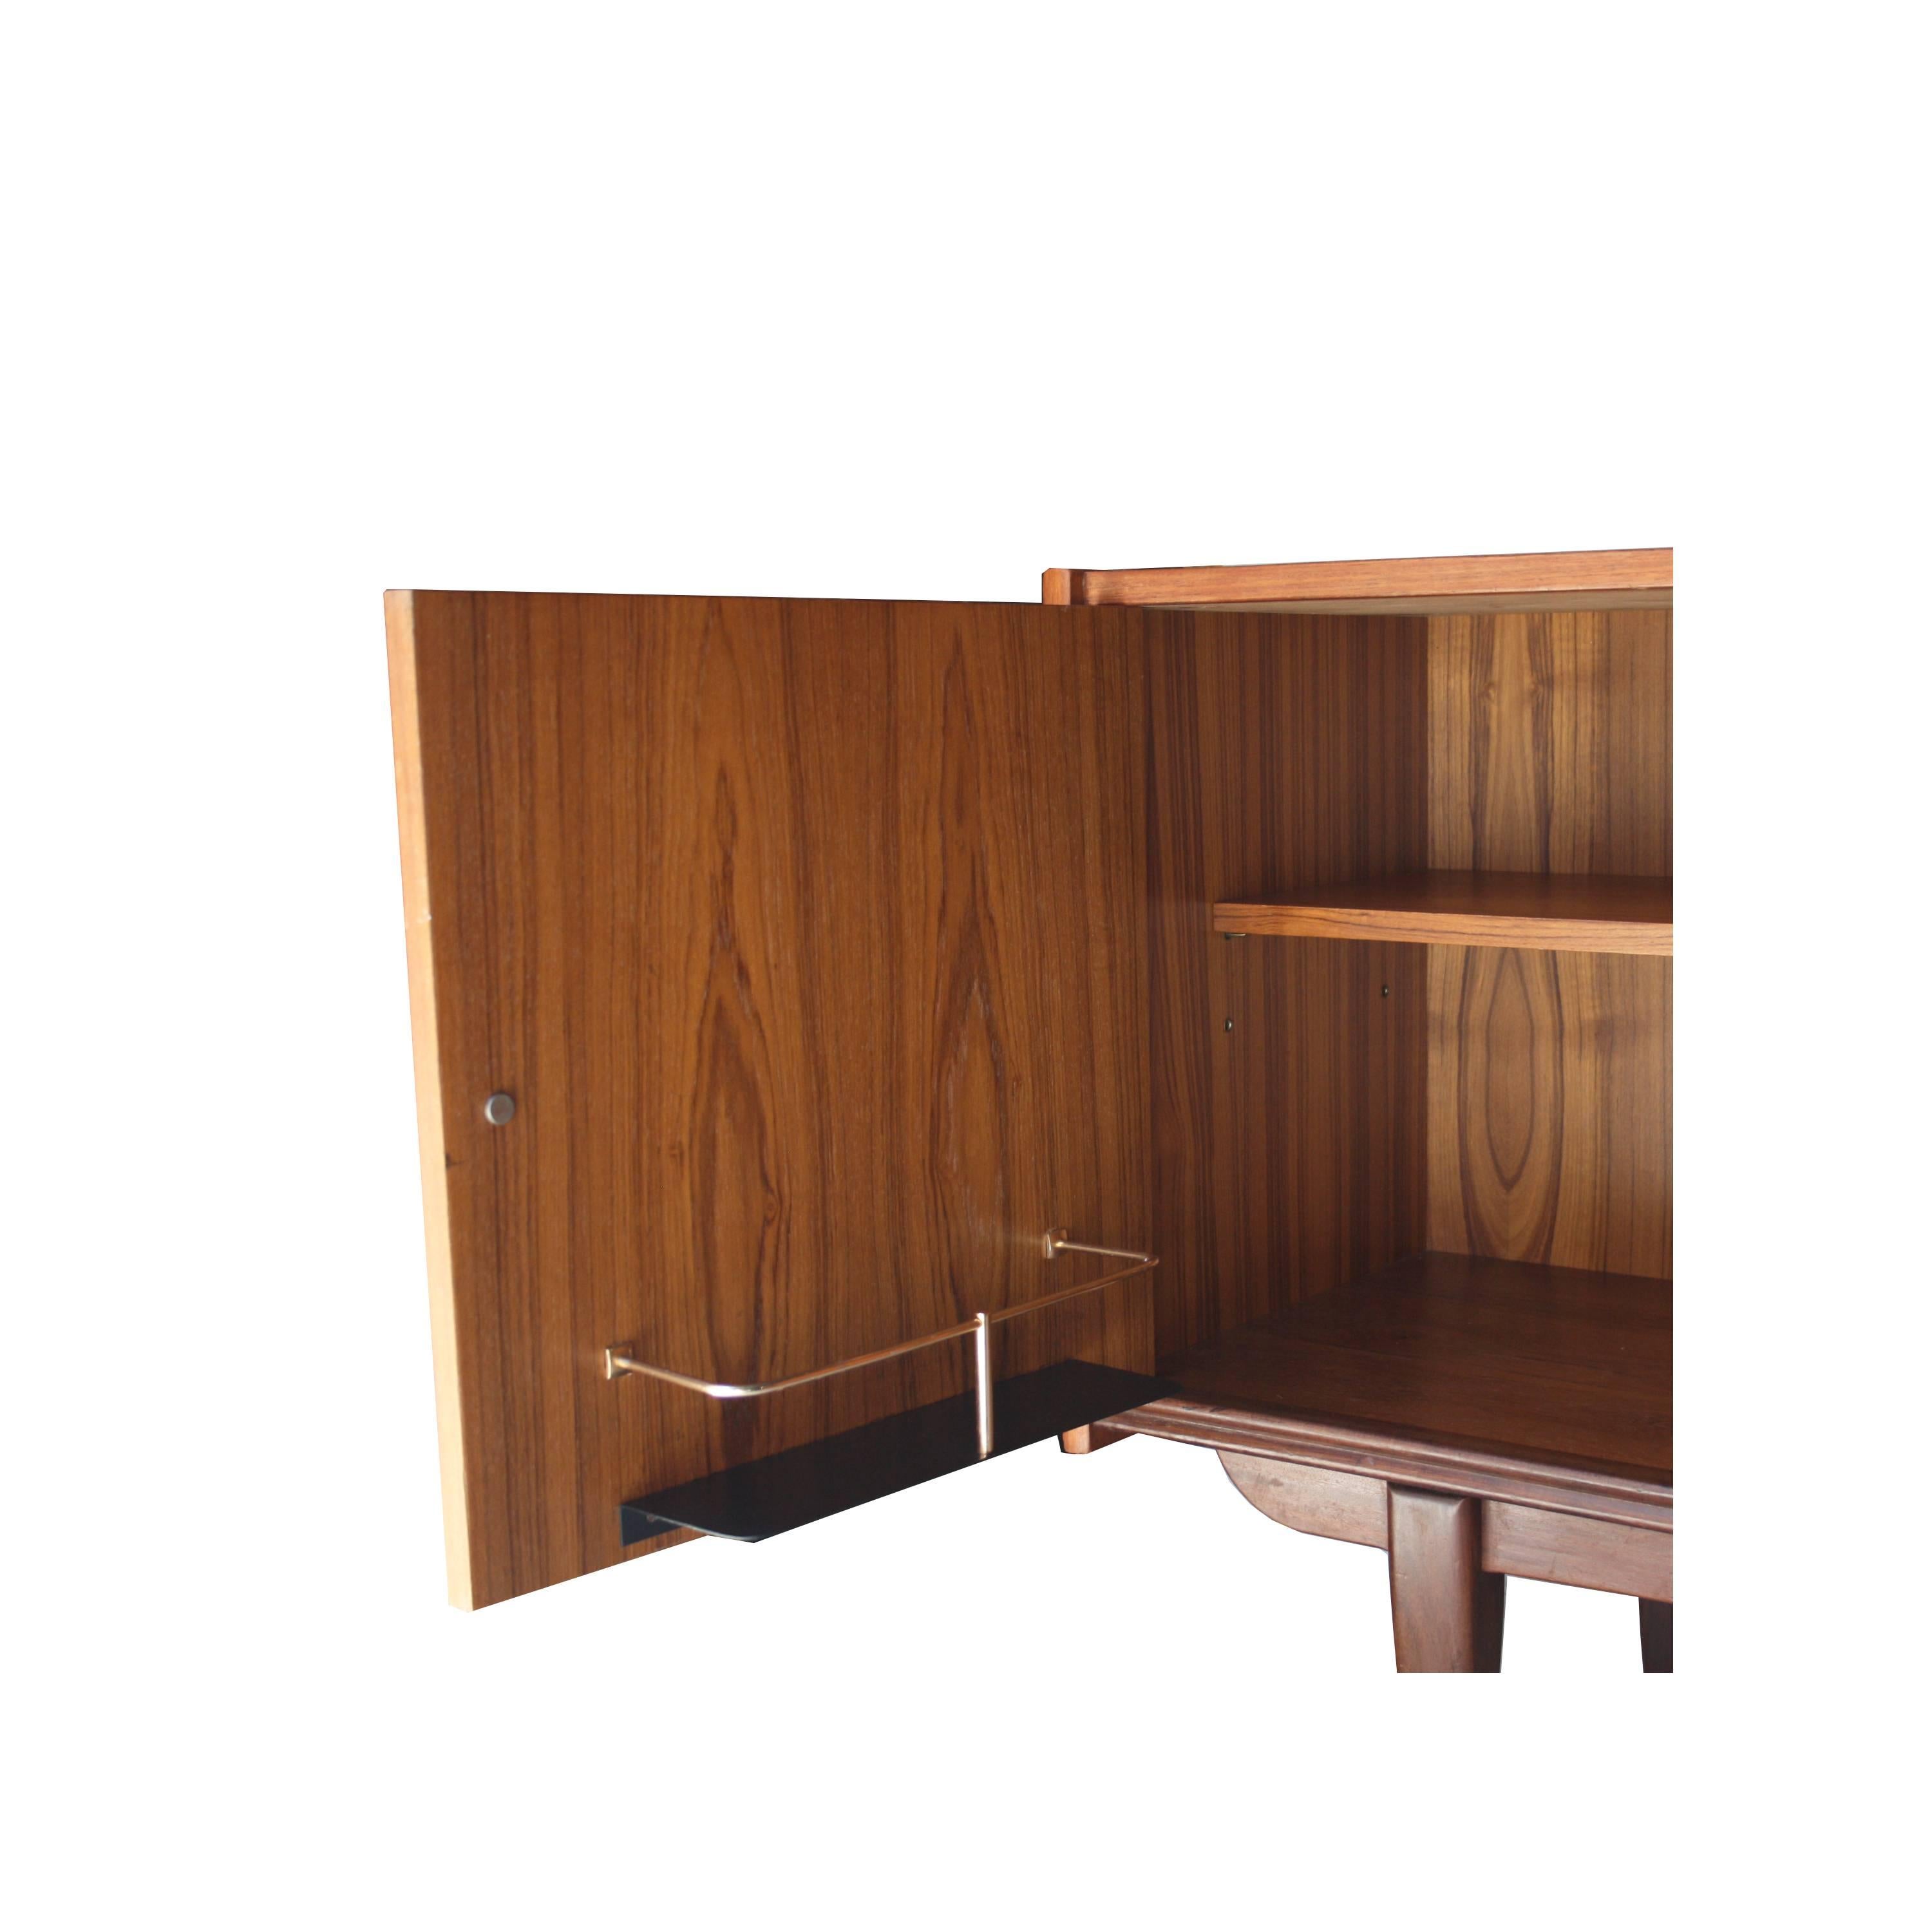 Sideboard with wooden solid structure covered in walnut veneer. With four drawers, three doors. Storage module and interior wine rack.